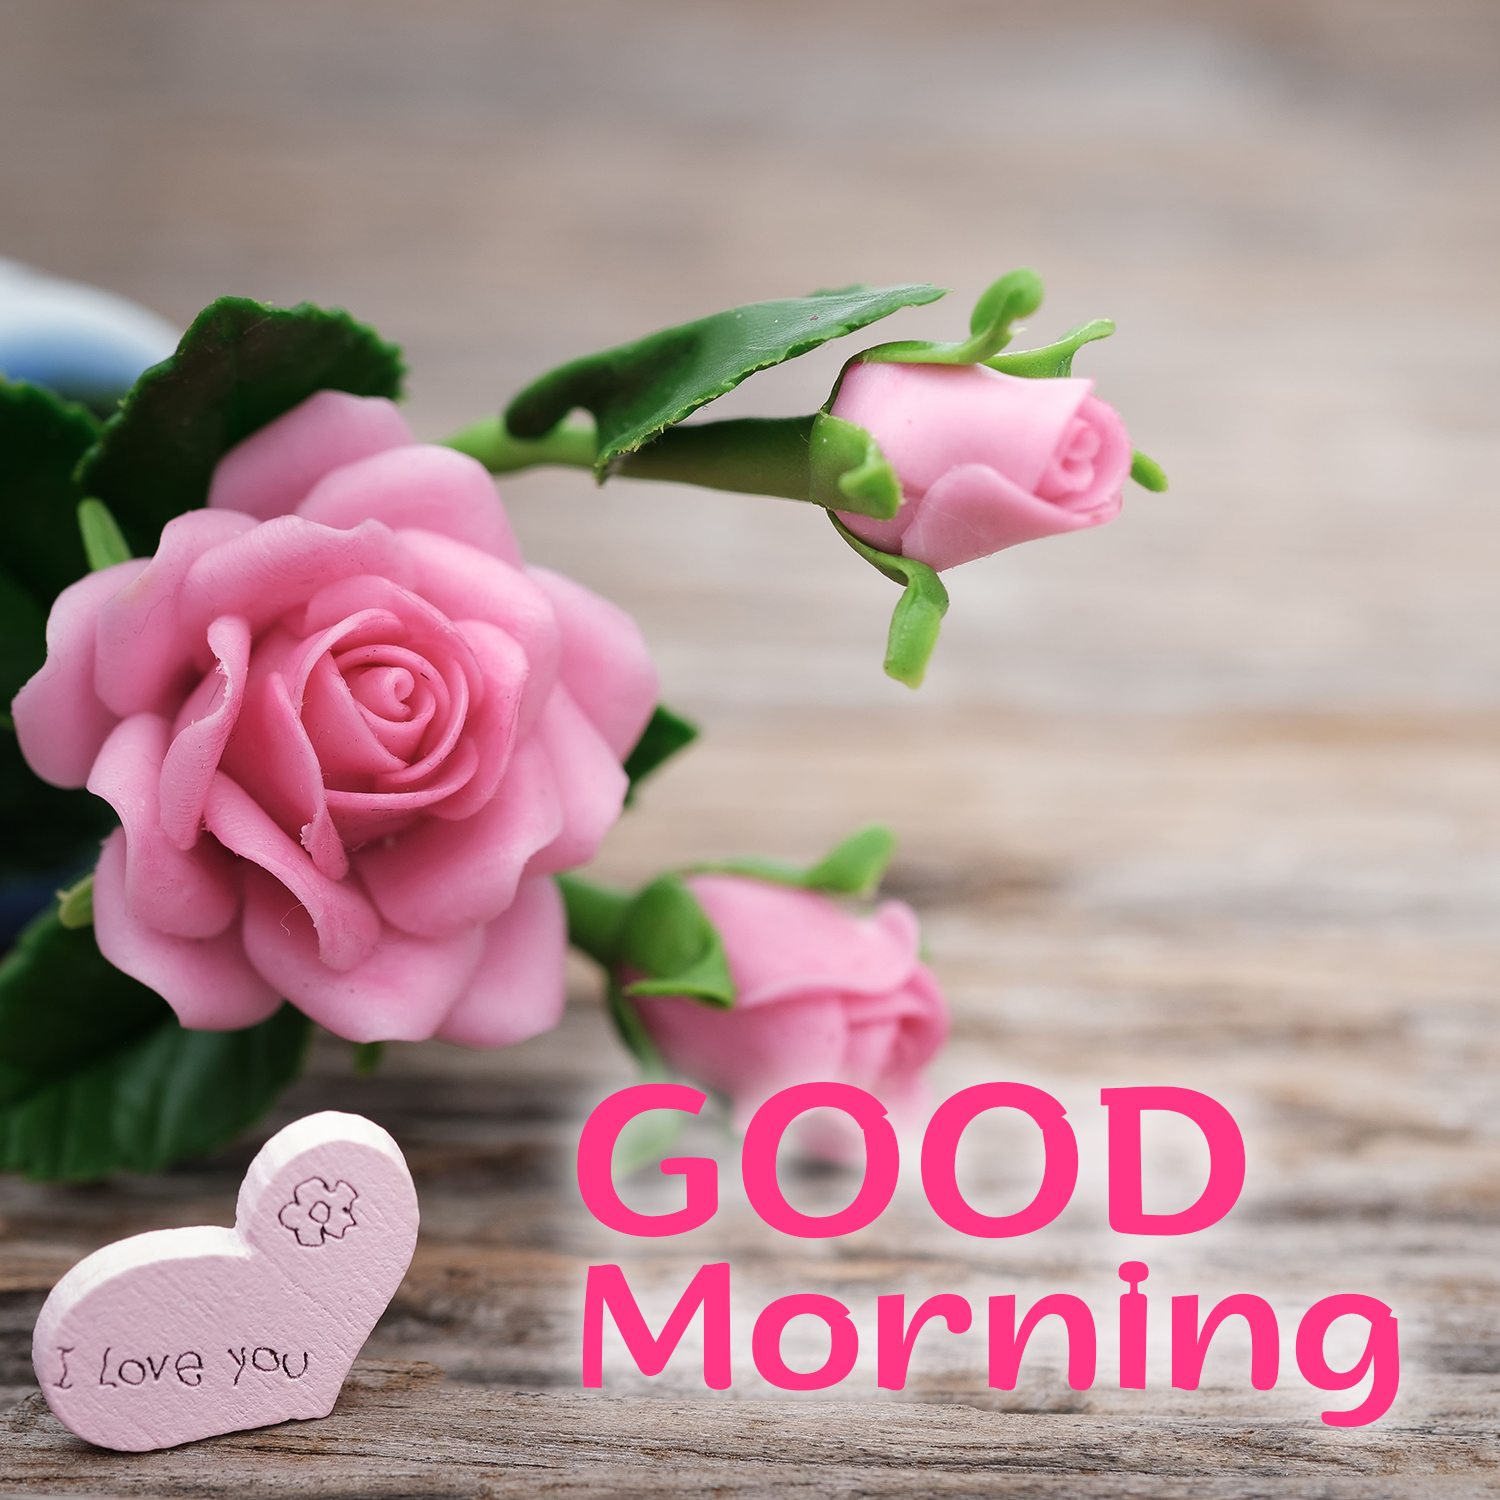 Good Morning Flowers Image for your Boyfriend and Girlfriend Morning Image, Quotes, Wishes, Messages, greetings & eCards